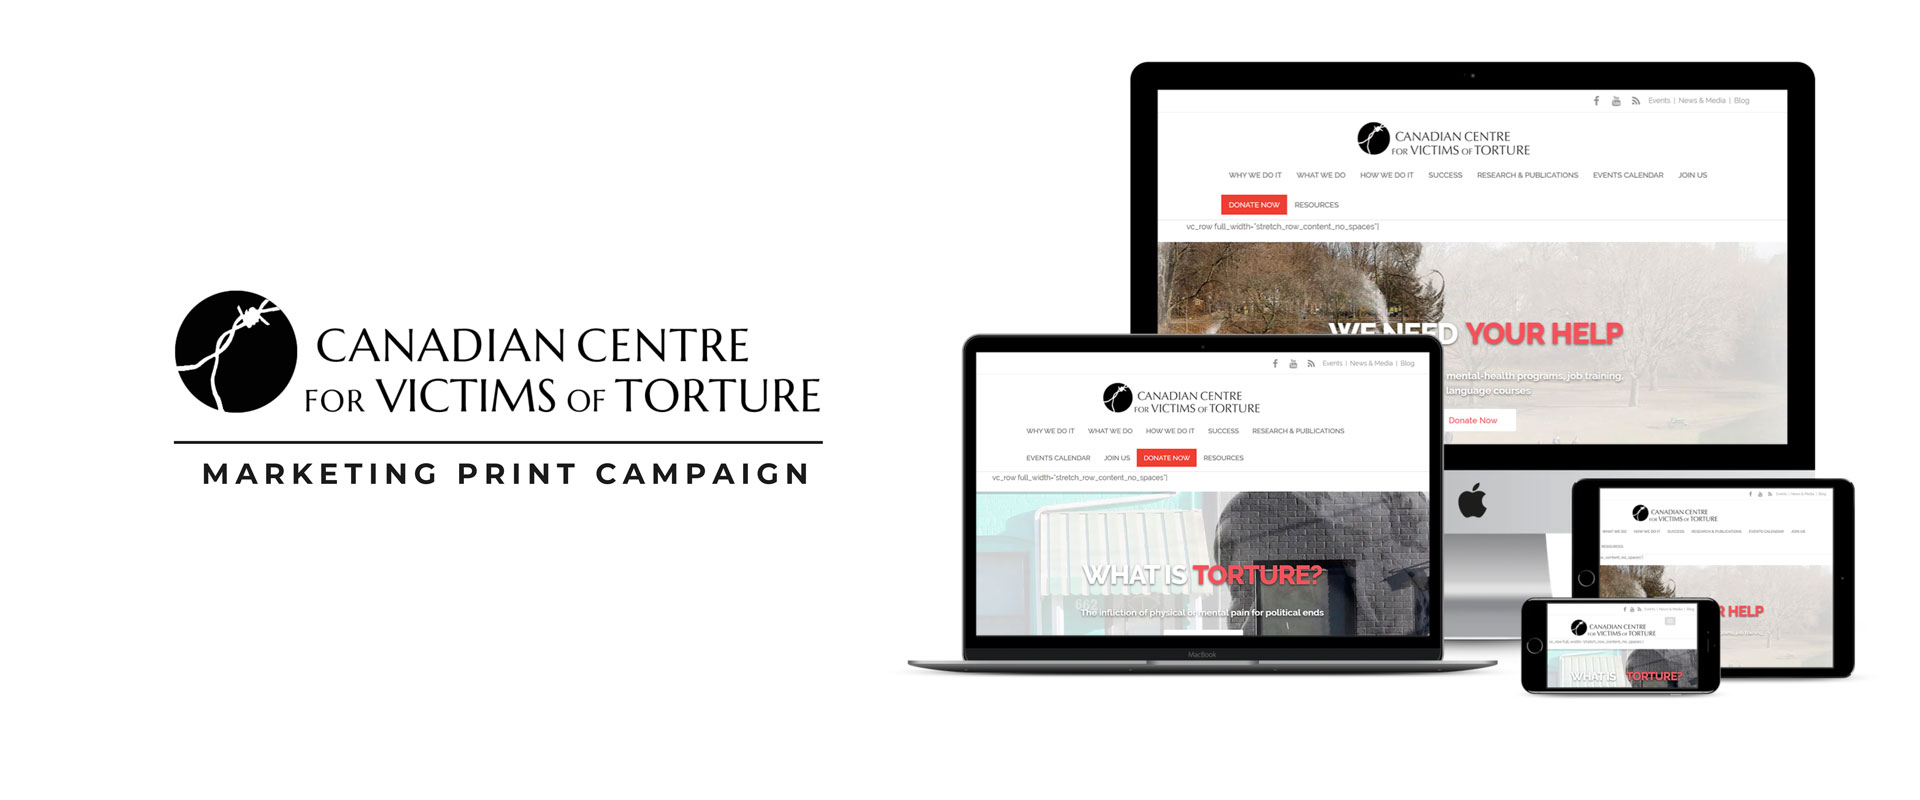 Canadian Centre for Victims of Torture